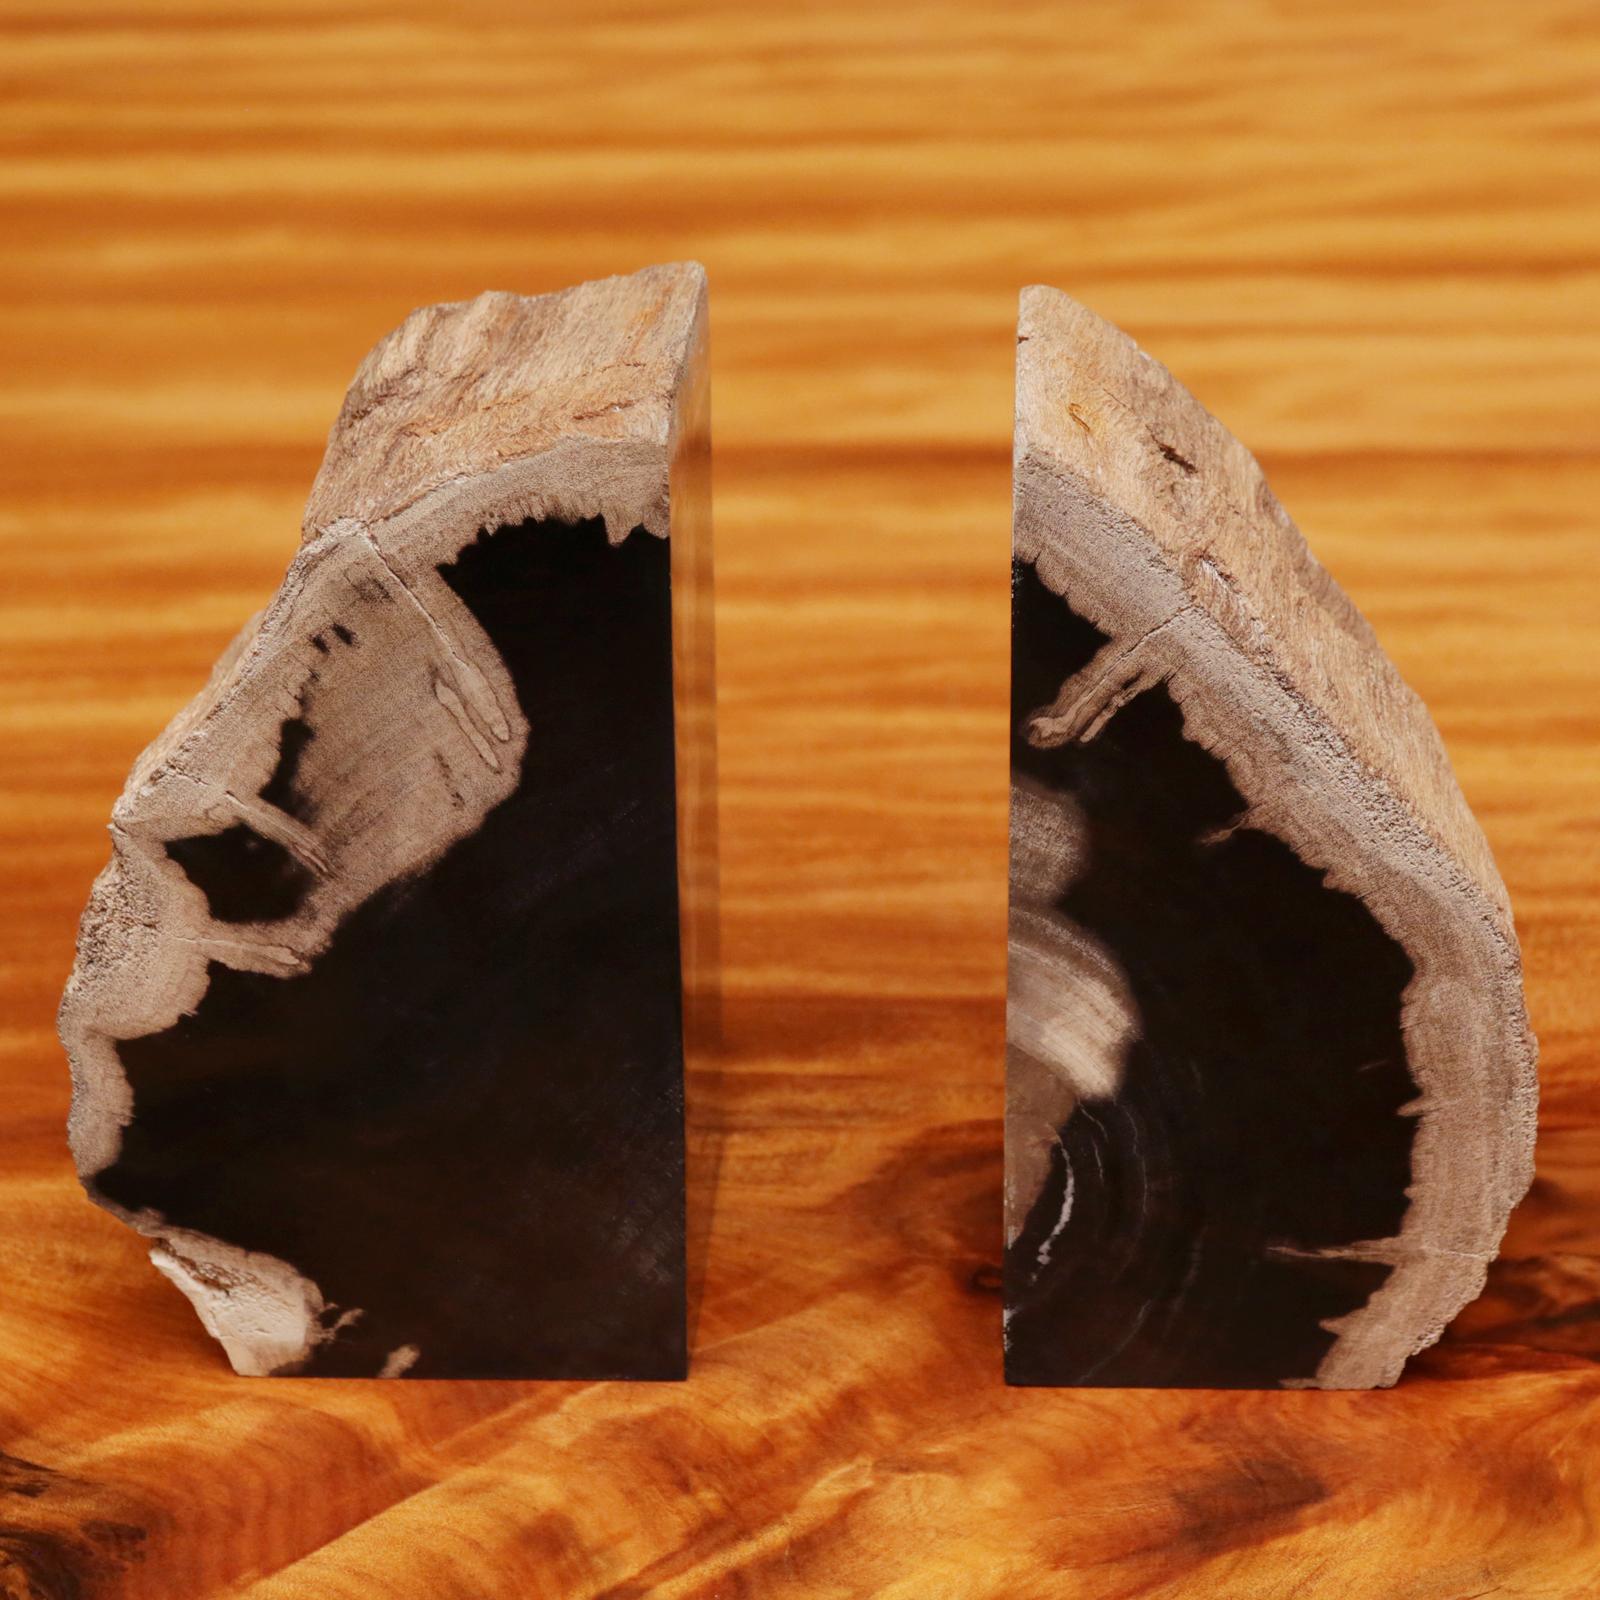 Bookends Petrified wood set of 2 in
solid petrified wood from Indonesia.
Each piece: L 11 x D 8 x H 20cm.